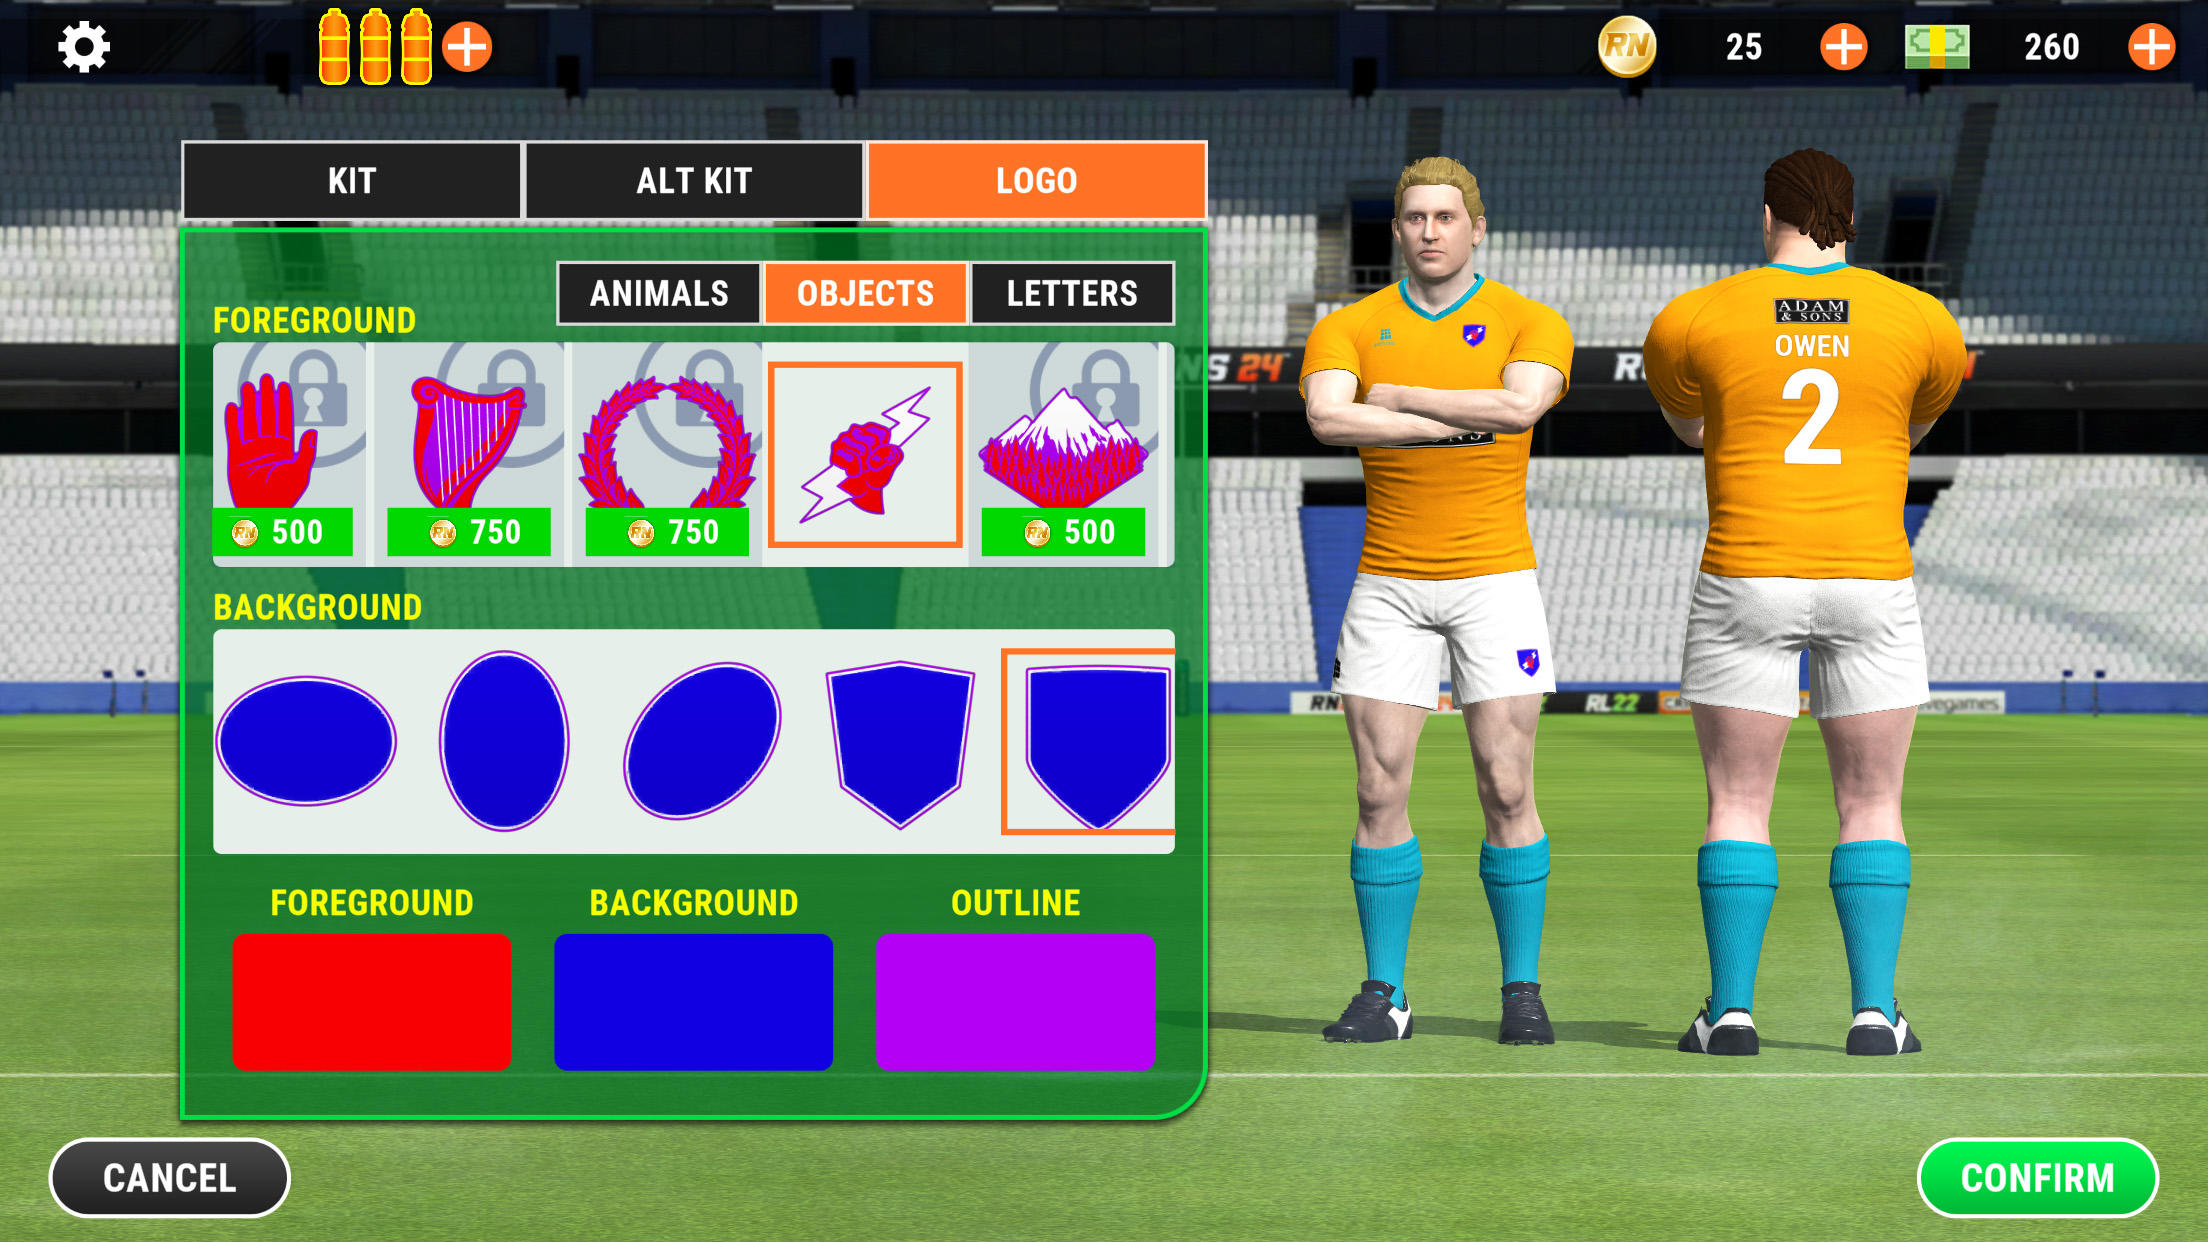 Rugby Nations 24 screenshot game